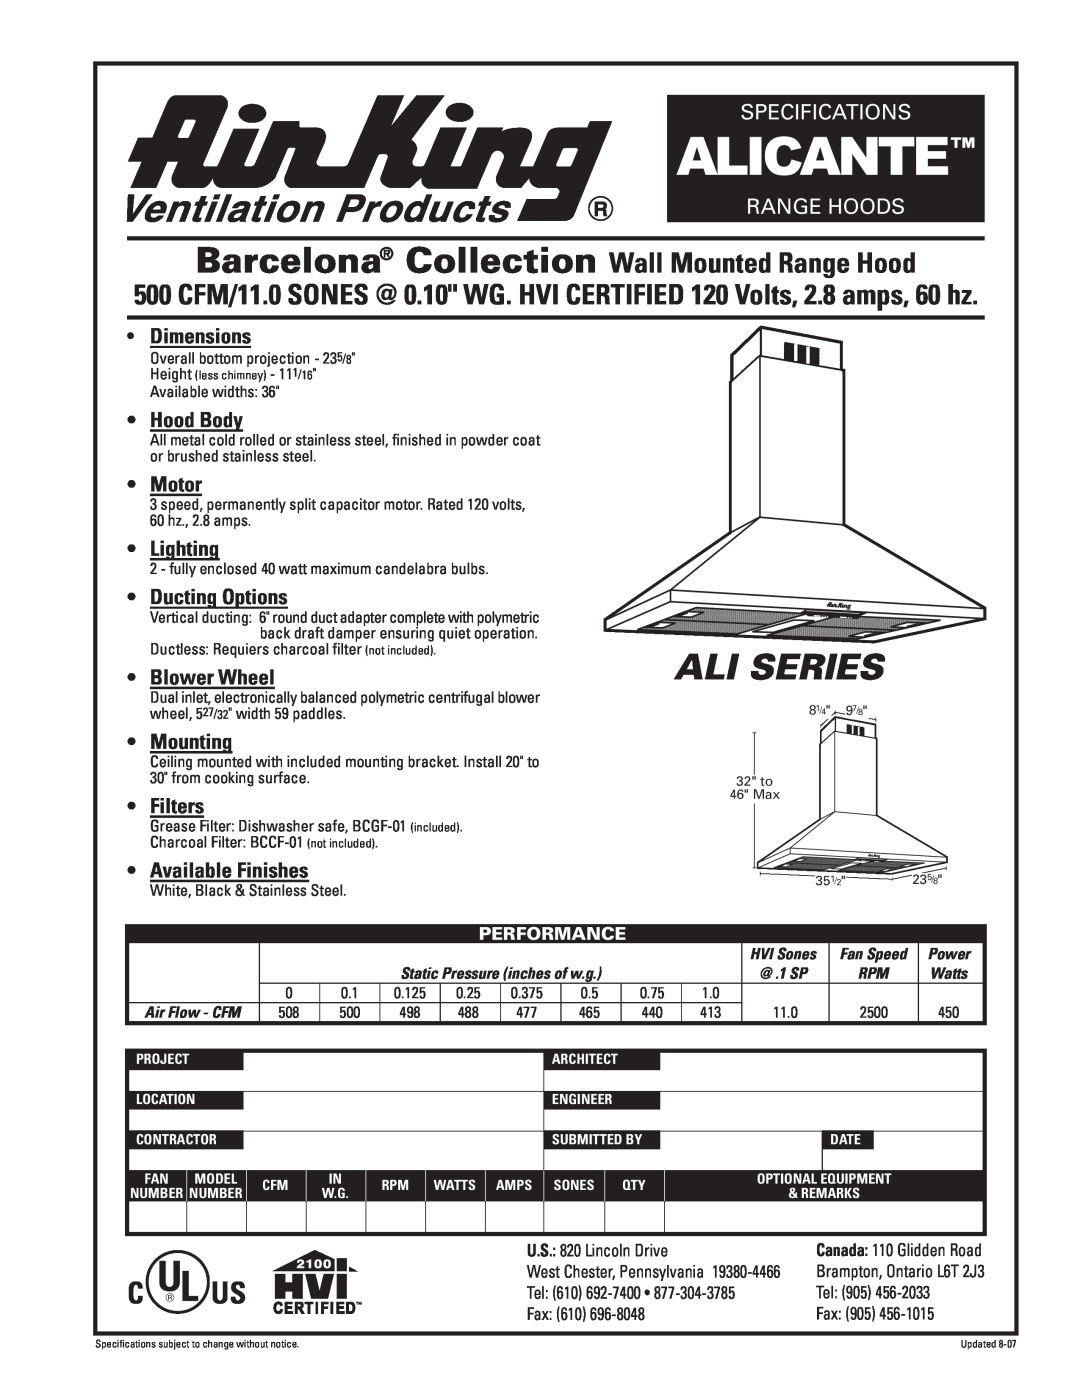 Air King Alicante specifications Ali Series, Barcelona Collection Wall Mounted Range Hood, Specifications, Range Hoods 